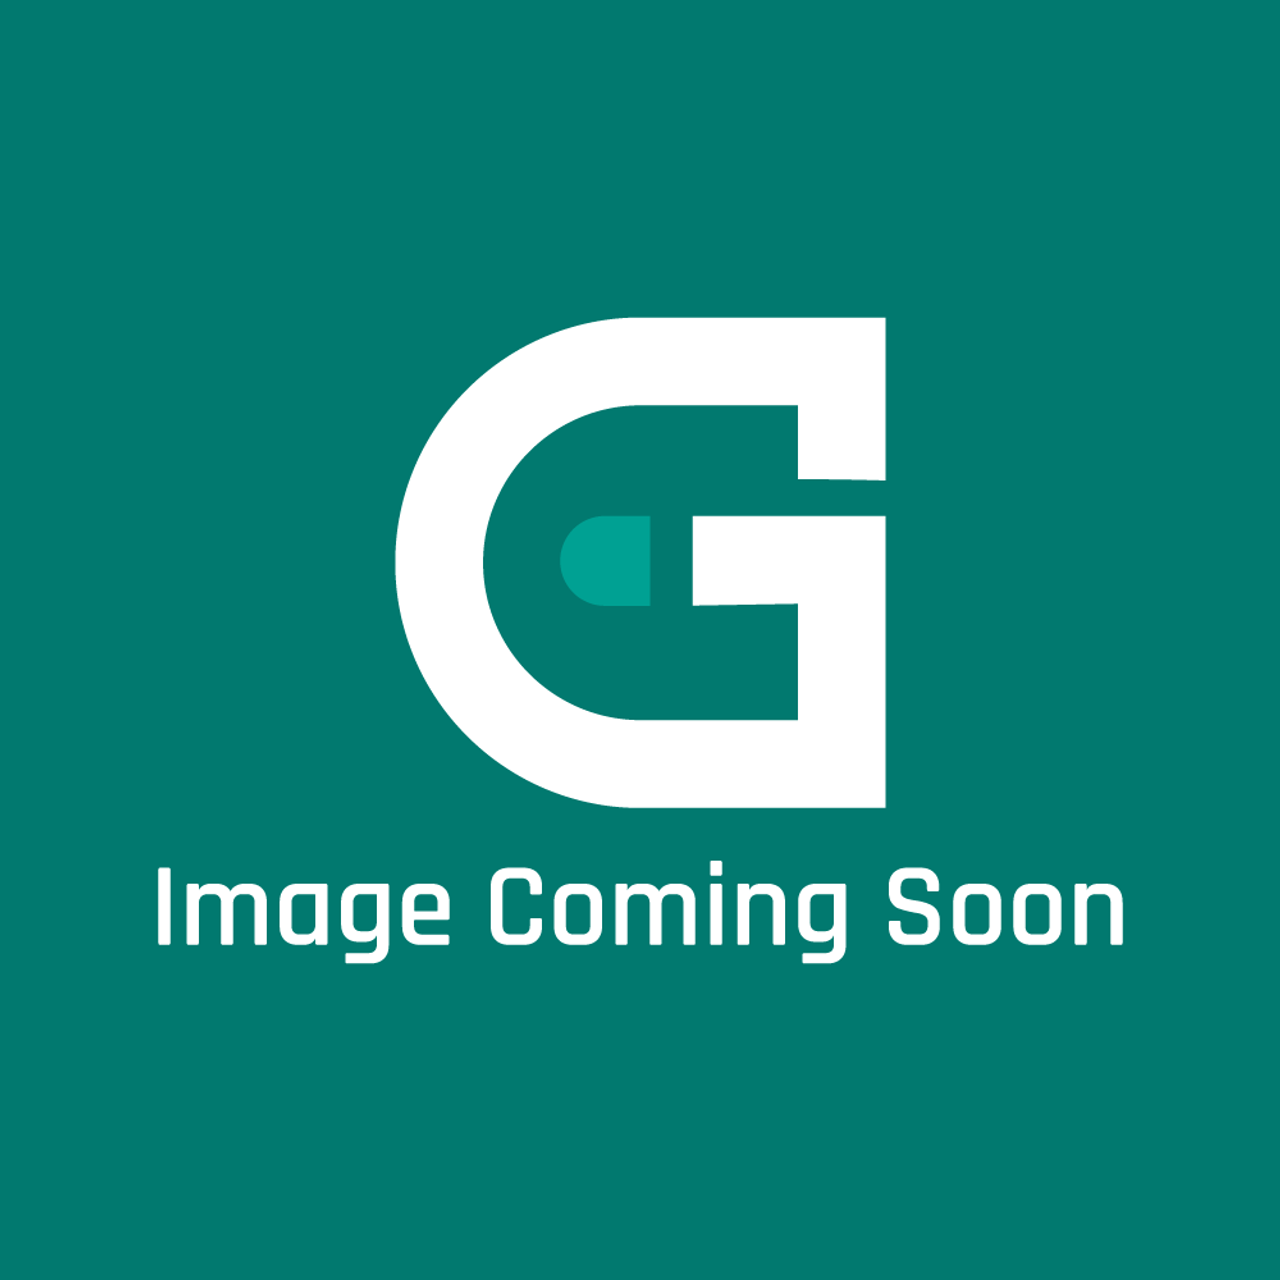 GE Appliances WB55K10081 - Liner Door Assembly - Image Coming Soon!